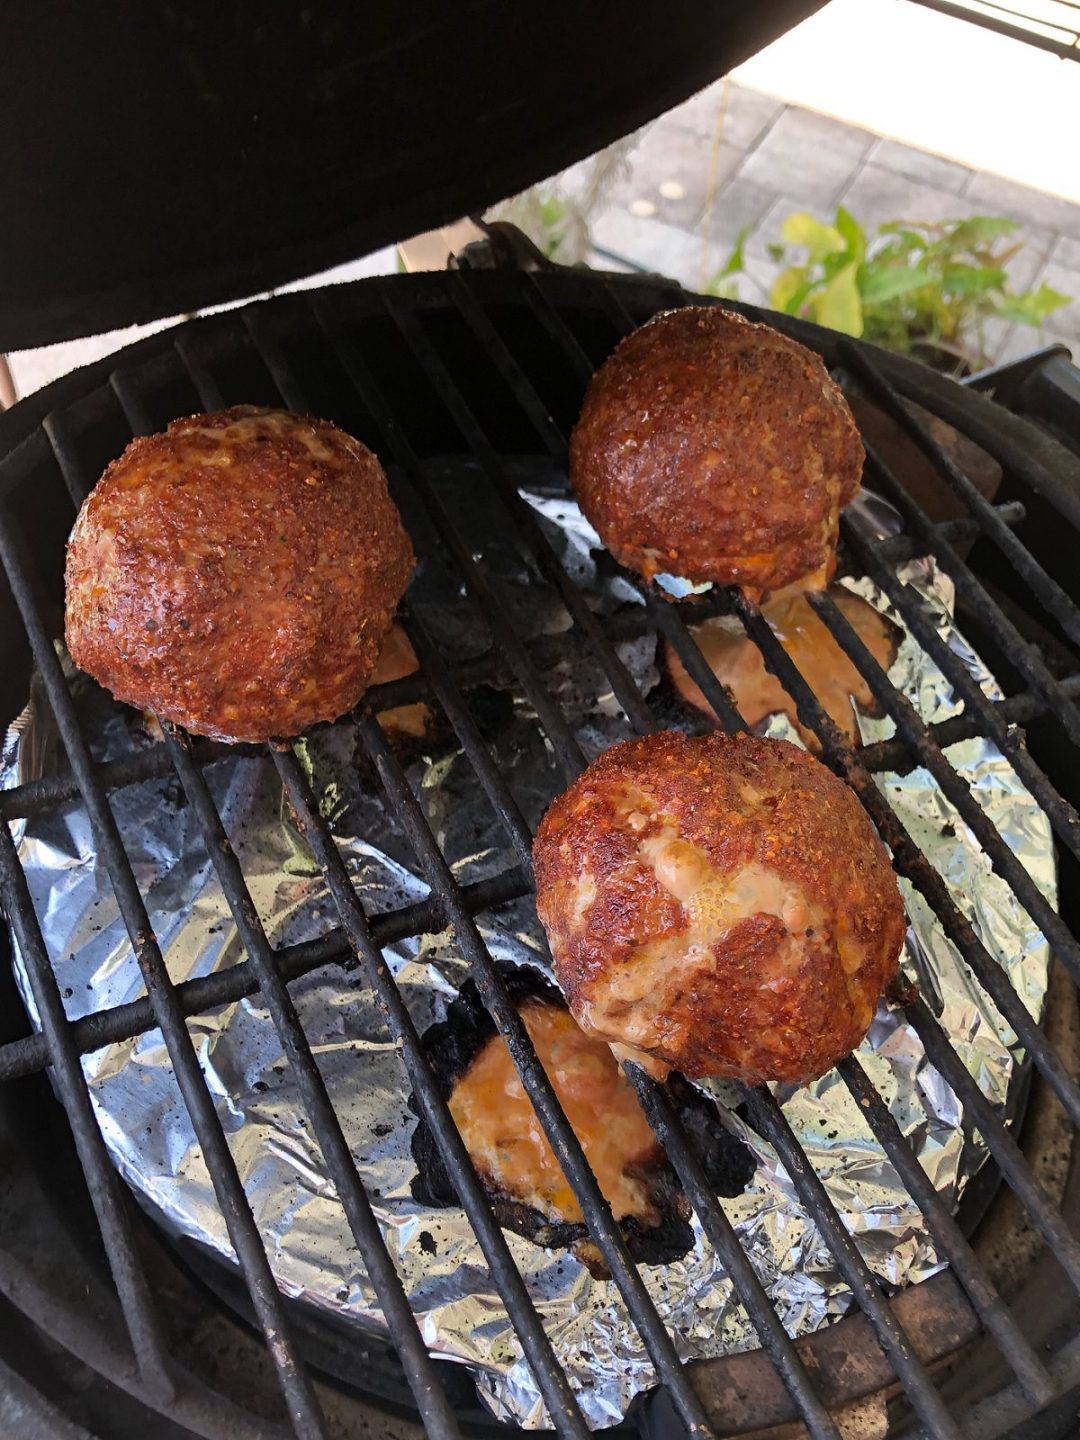 Place eggs on smoker and cook until golden brown